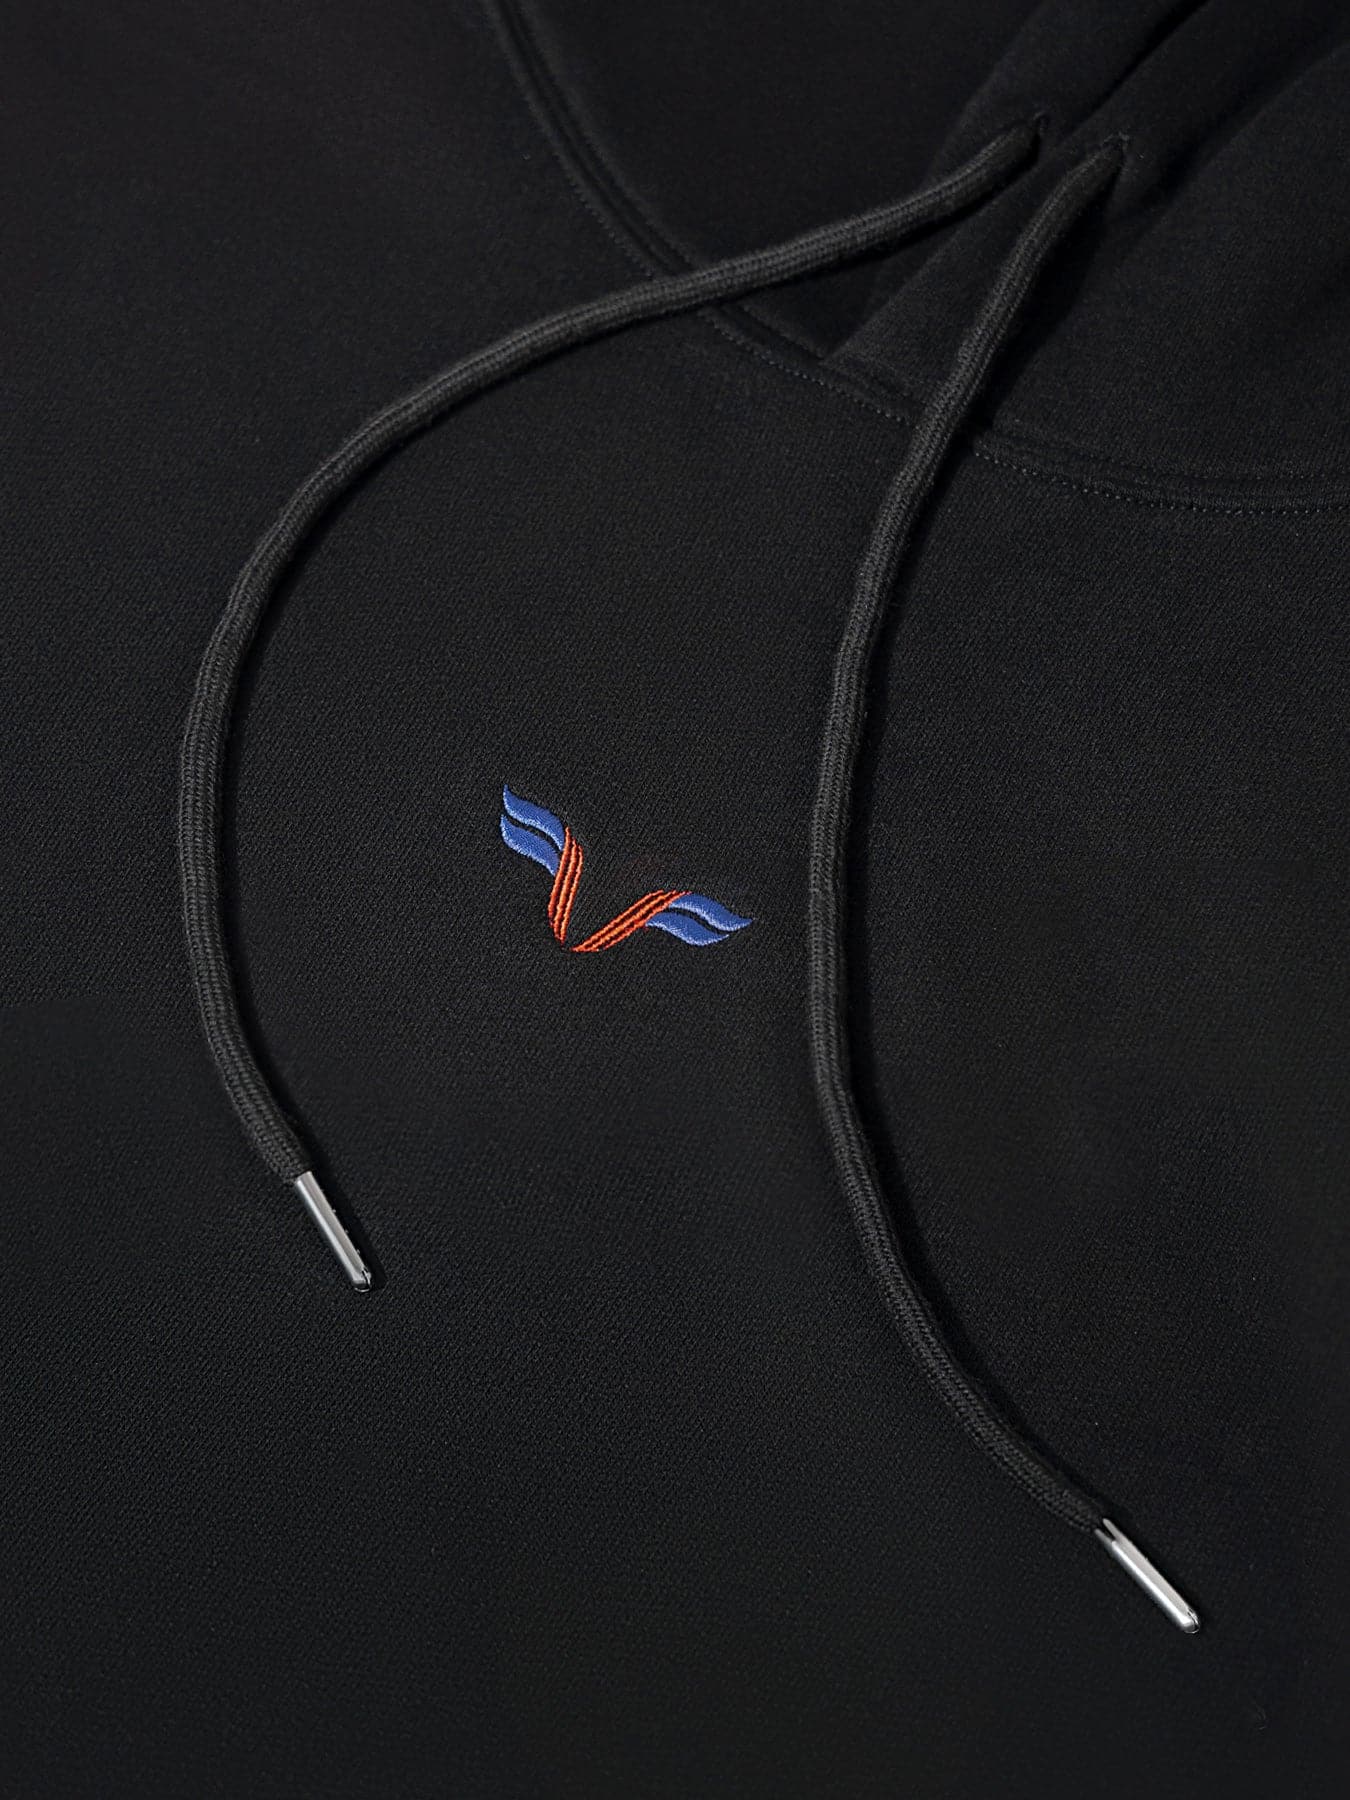 Fioboc Embroidered Classic Hoodie